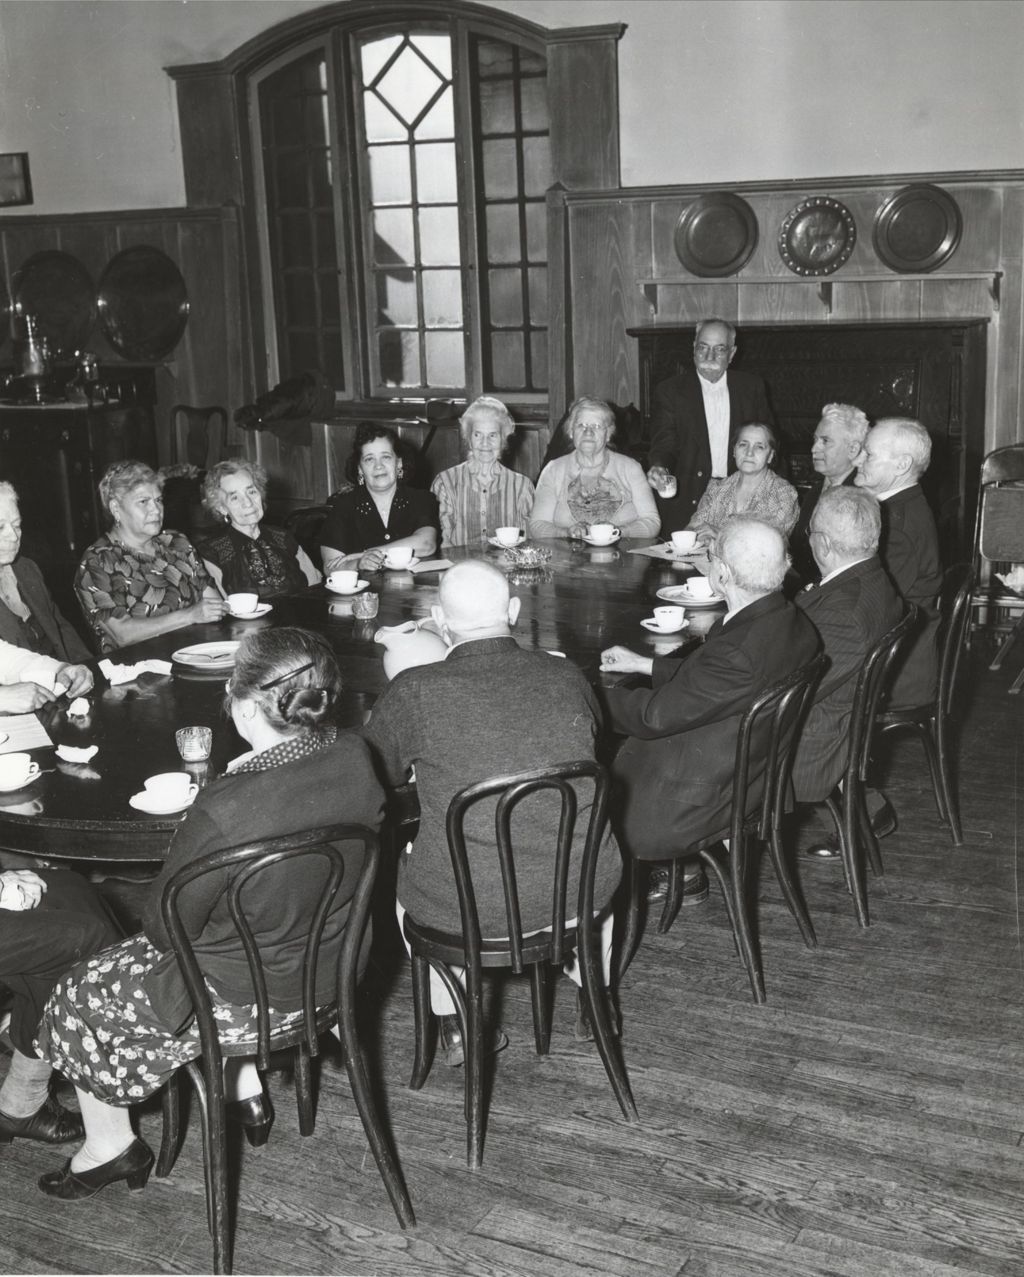 Members of the Hull-House senior citizens club "Young Old Timers" having coffee or tea around a table in the Residents Dining Hall